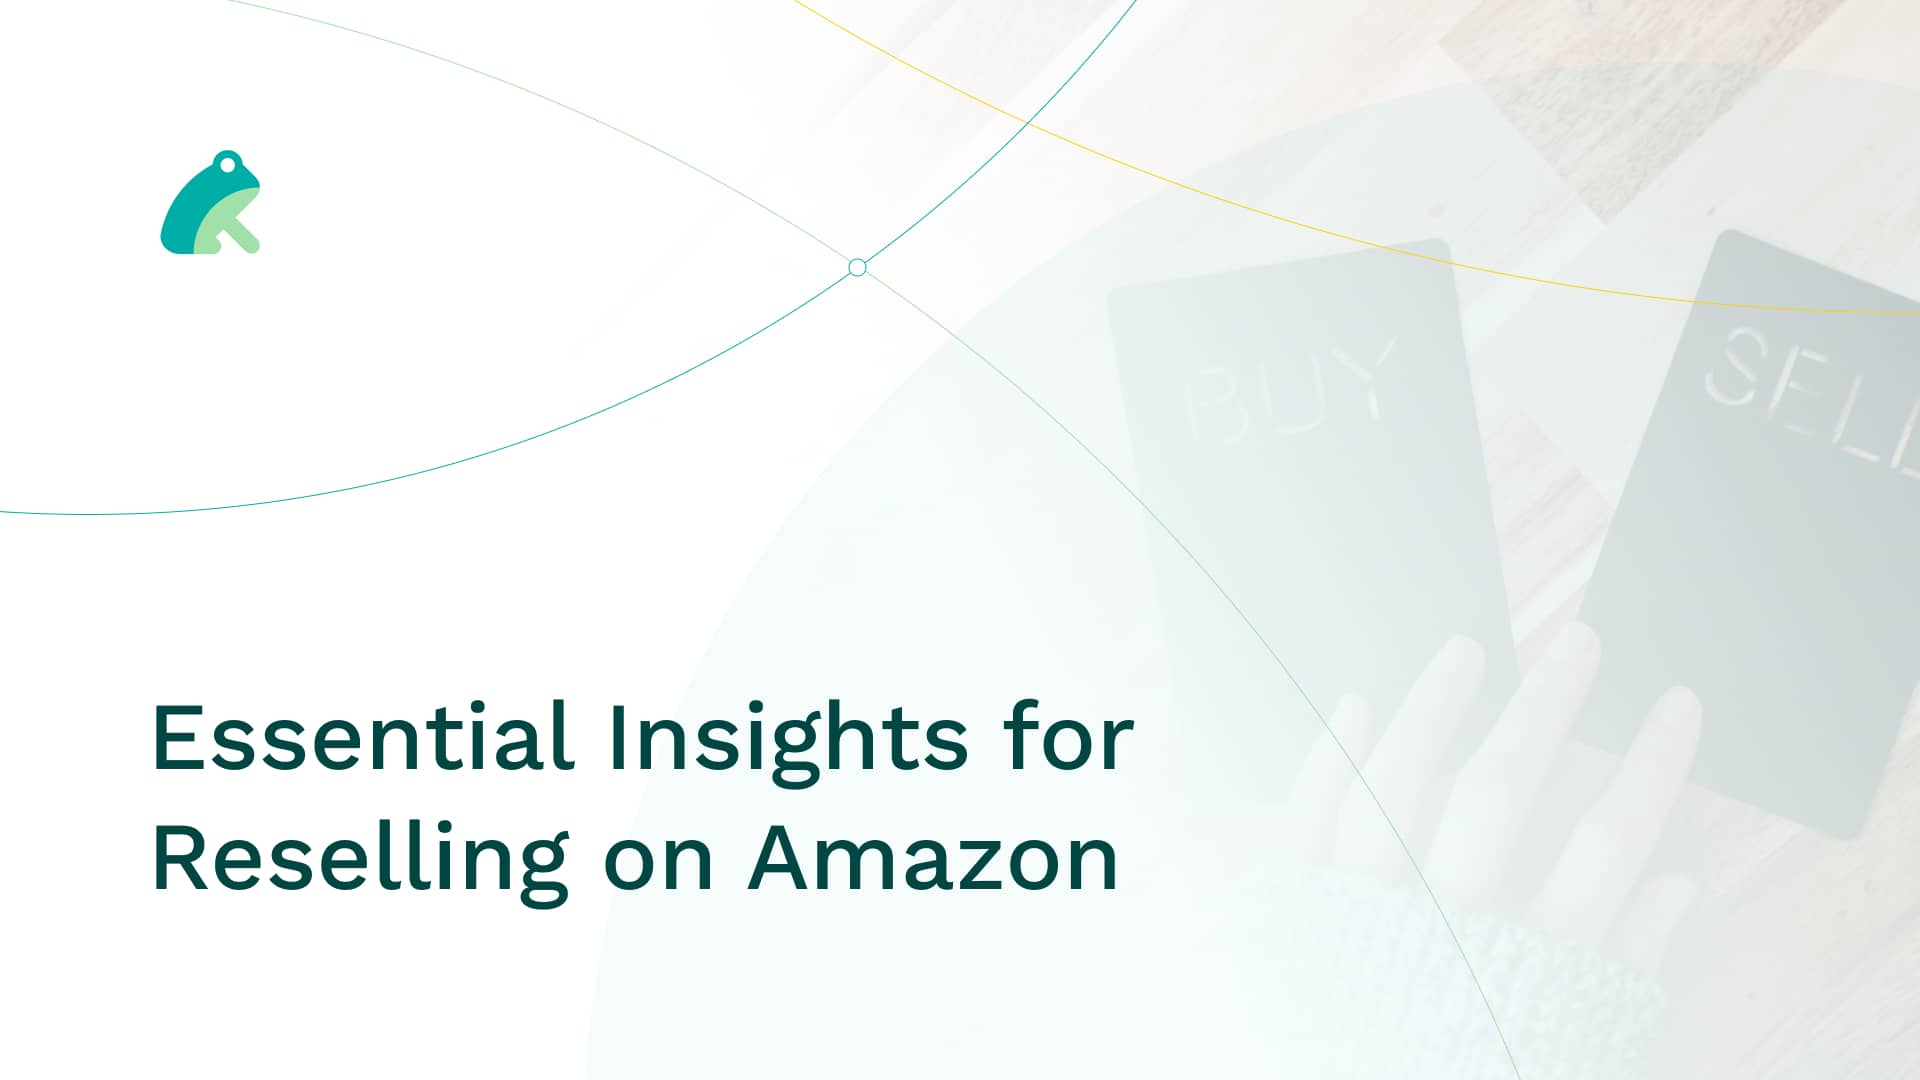 Essential Insights for Reselling on Amazon